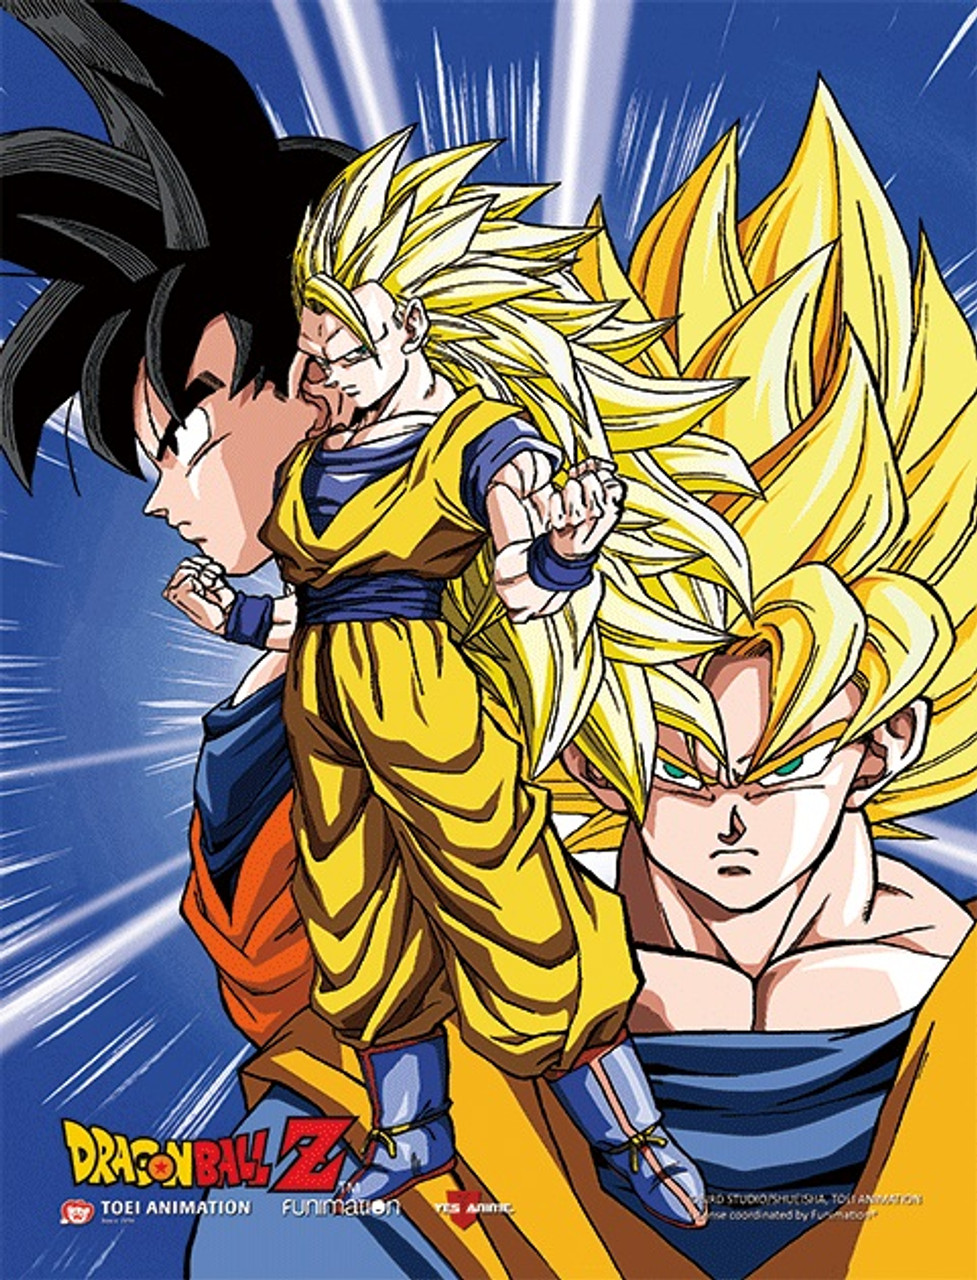 Dragon Ball Z 3D Poster - Sean's Anime & Other Things